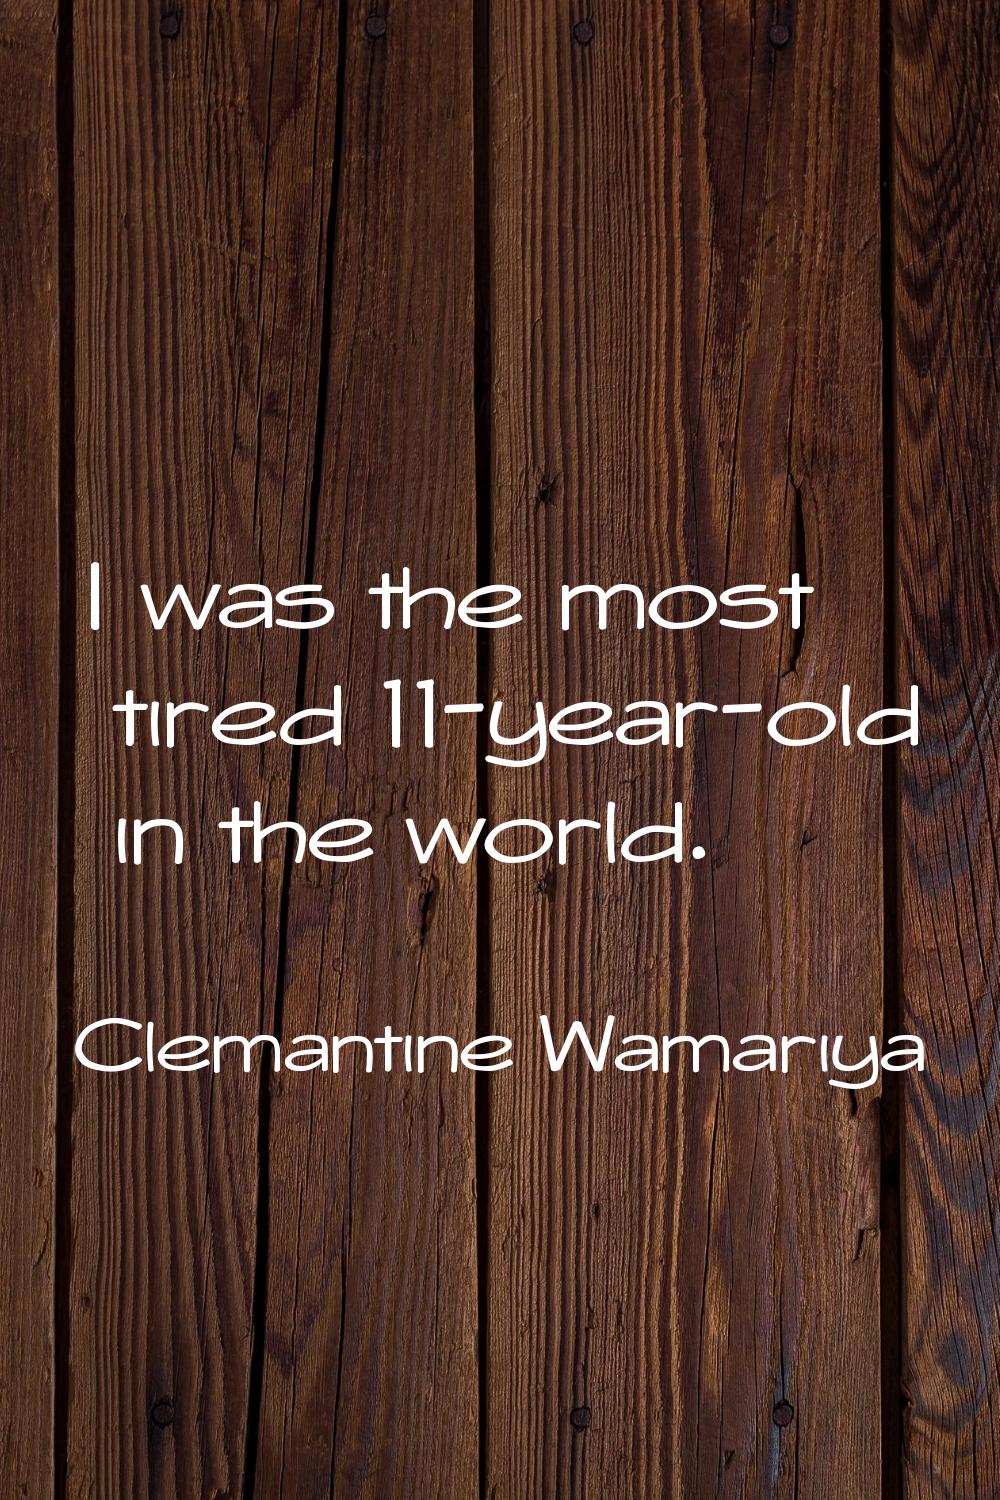 I was the most tired 11-year-old in the world.